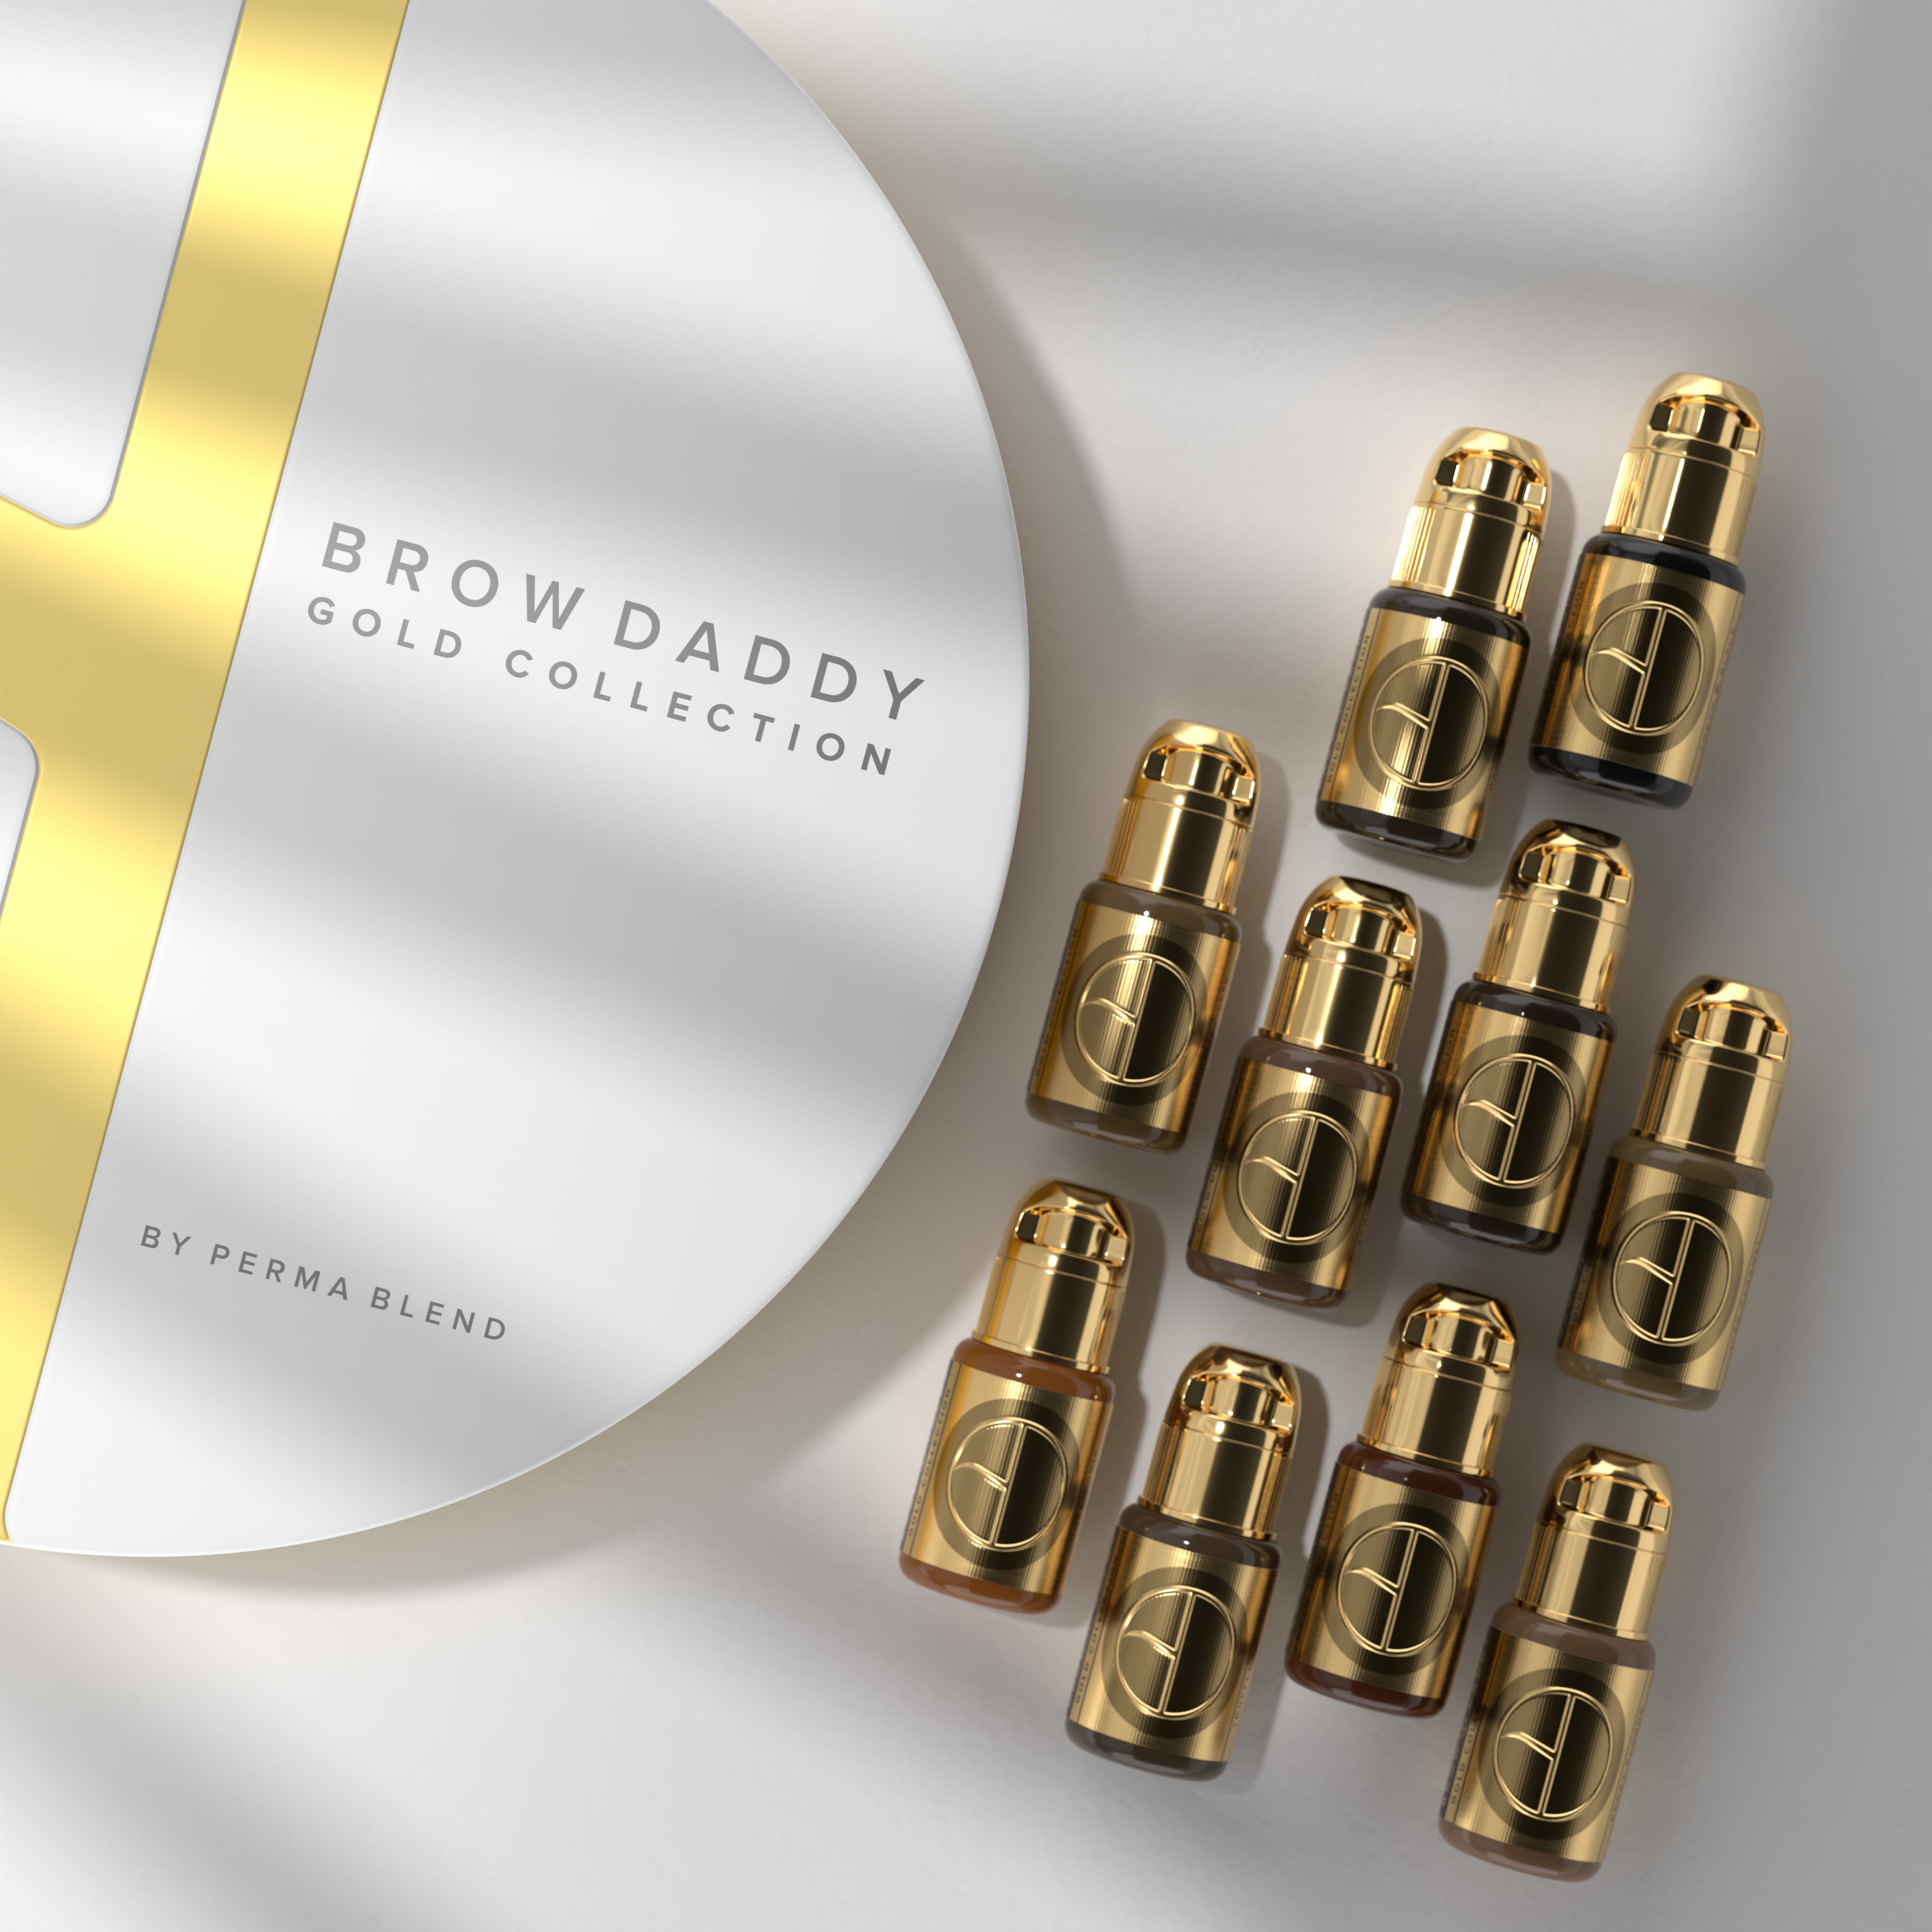 Brow Daddy The Gold Collection - Cosmedic Supplies